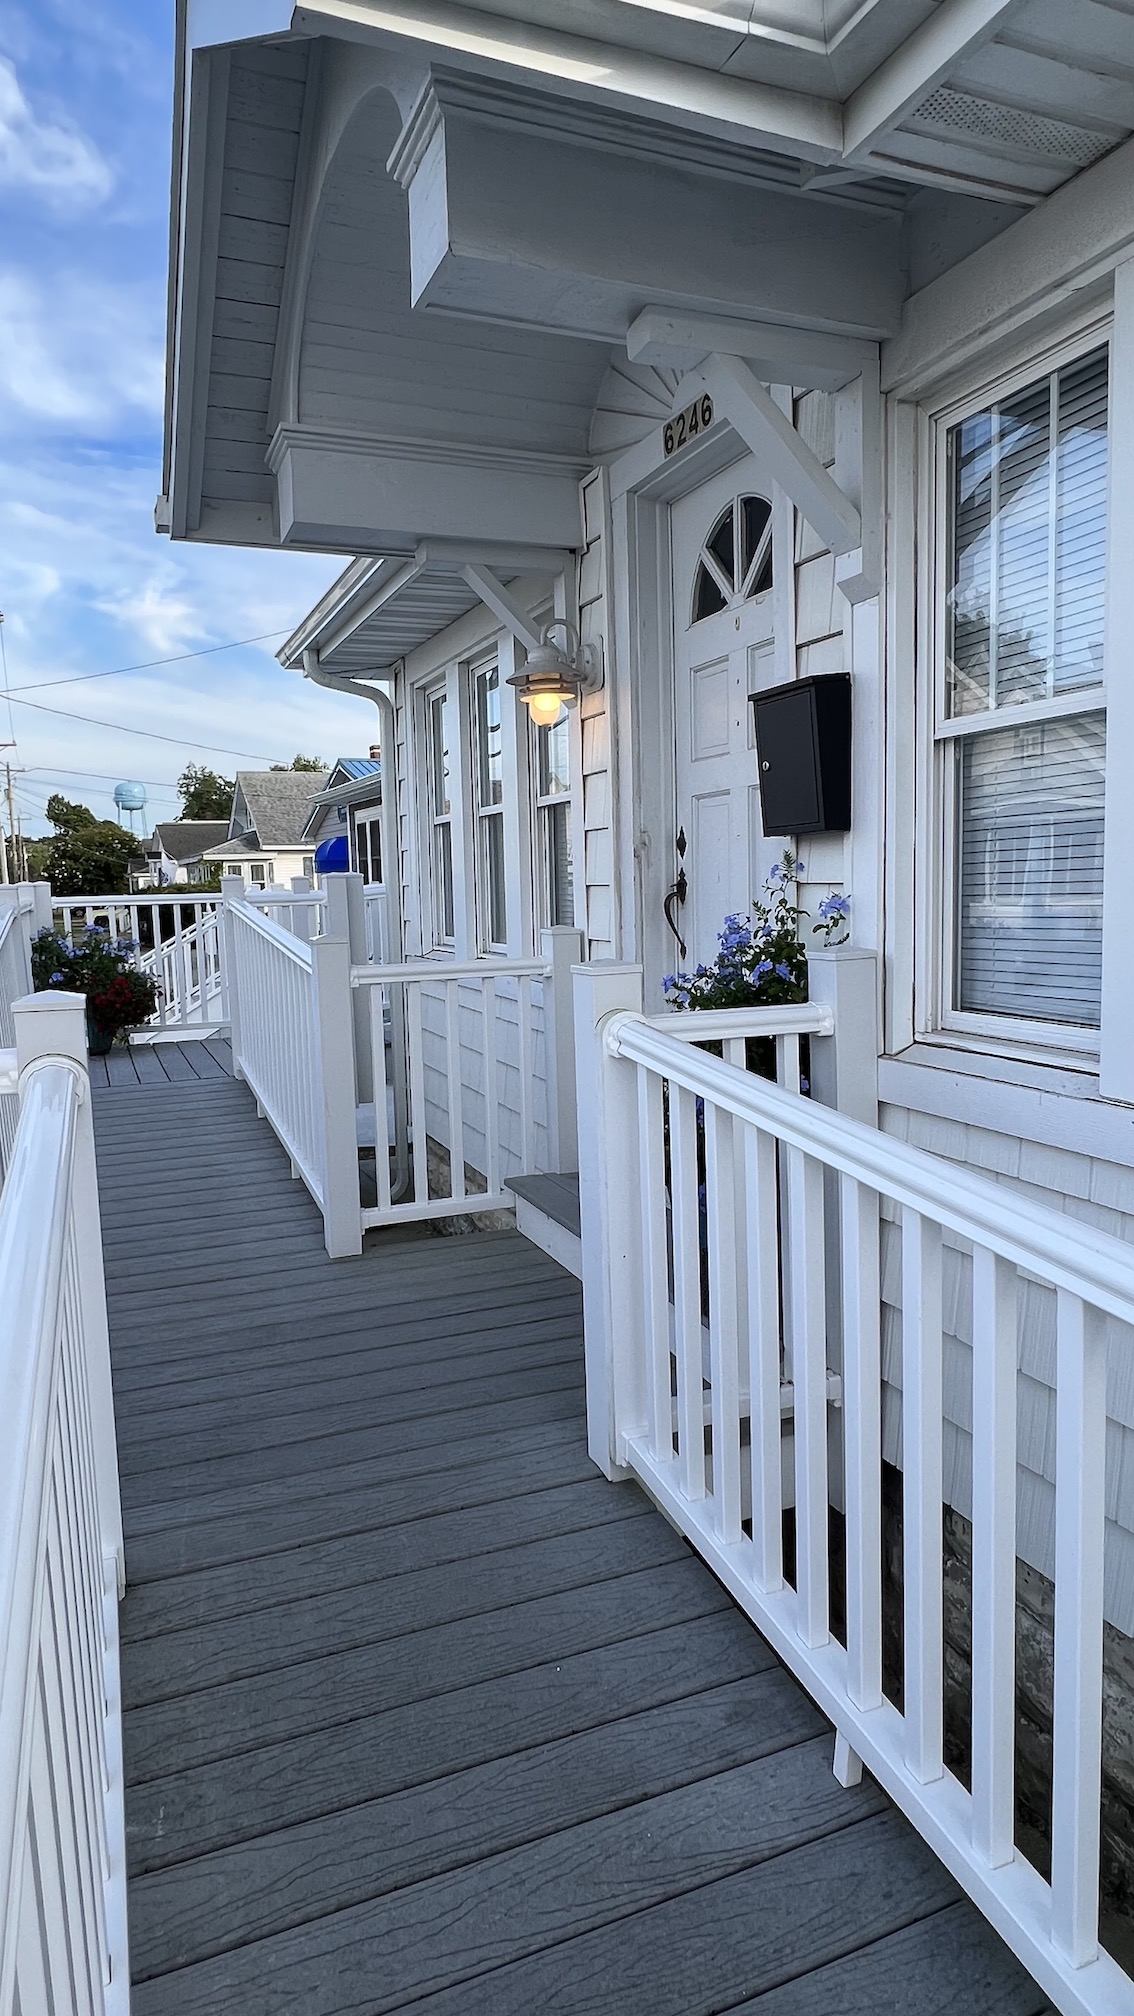 The front porch of the Island Community House.